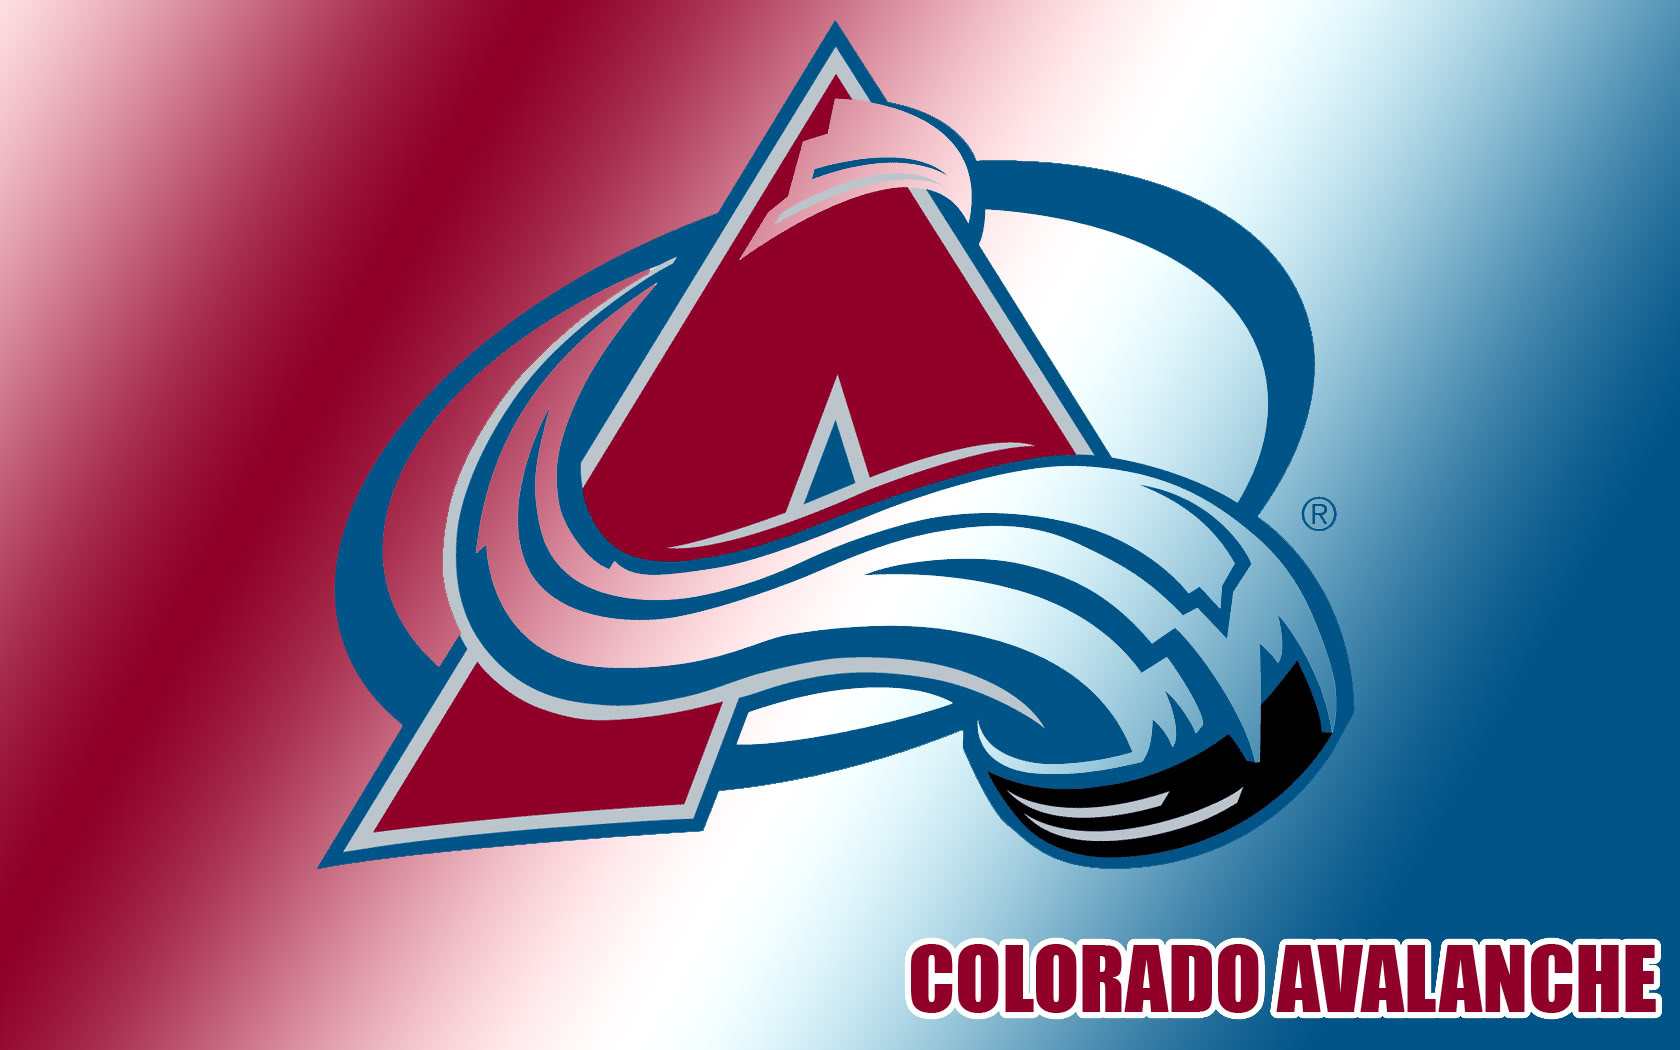 Wallpapers   Page 2   Beyond Hockey   Colorado Avalanche   Message